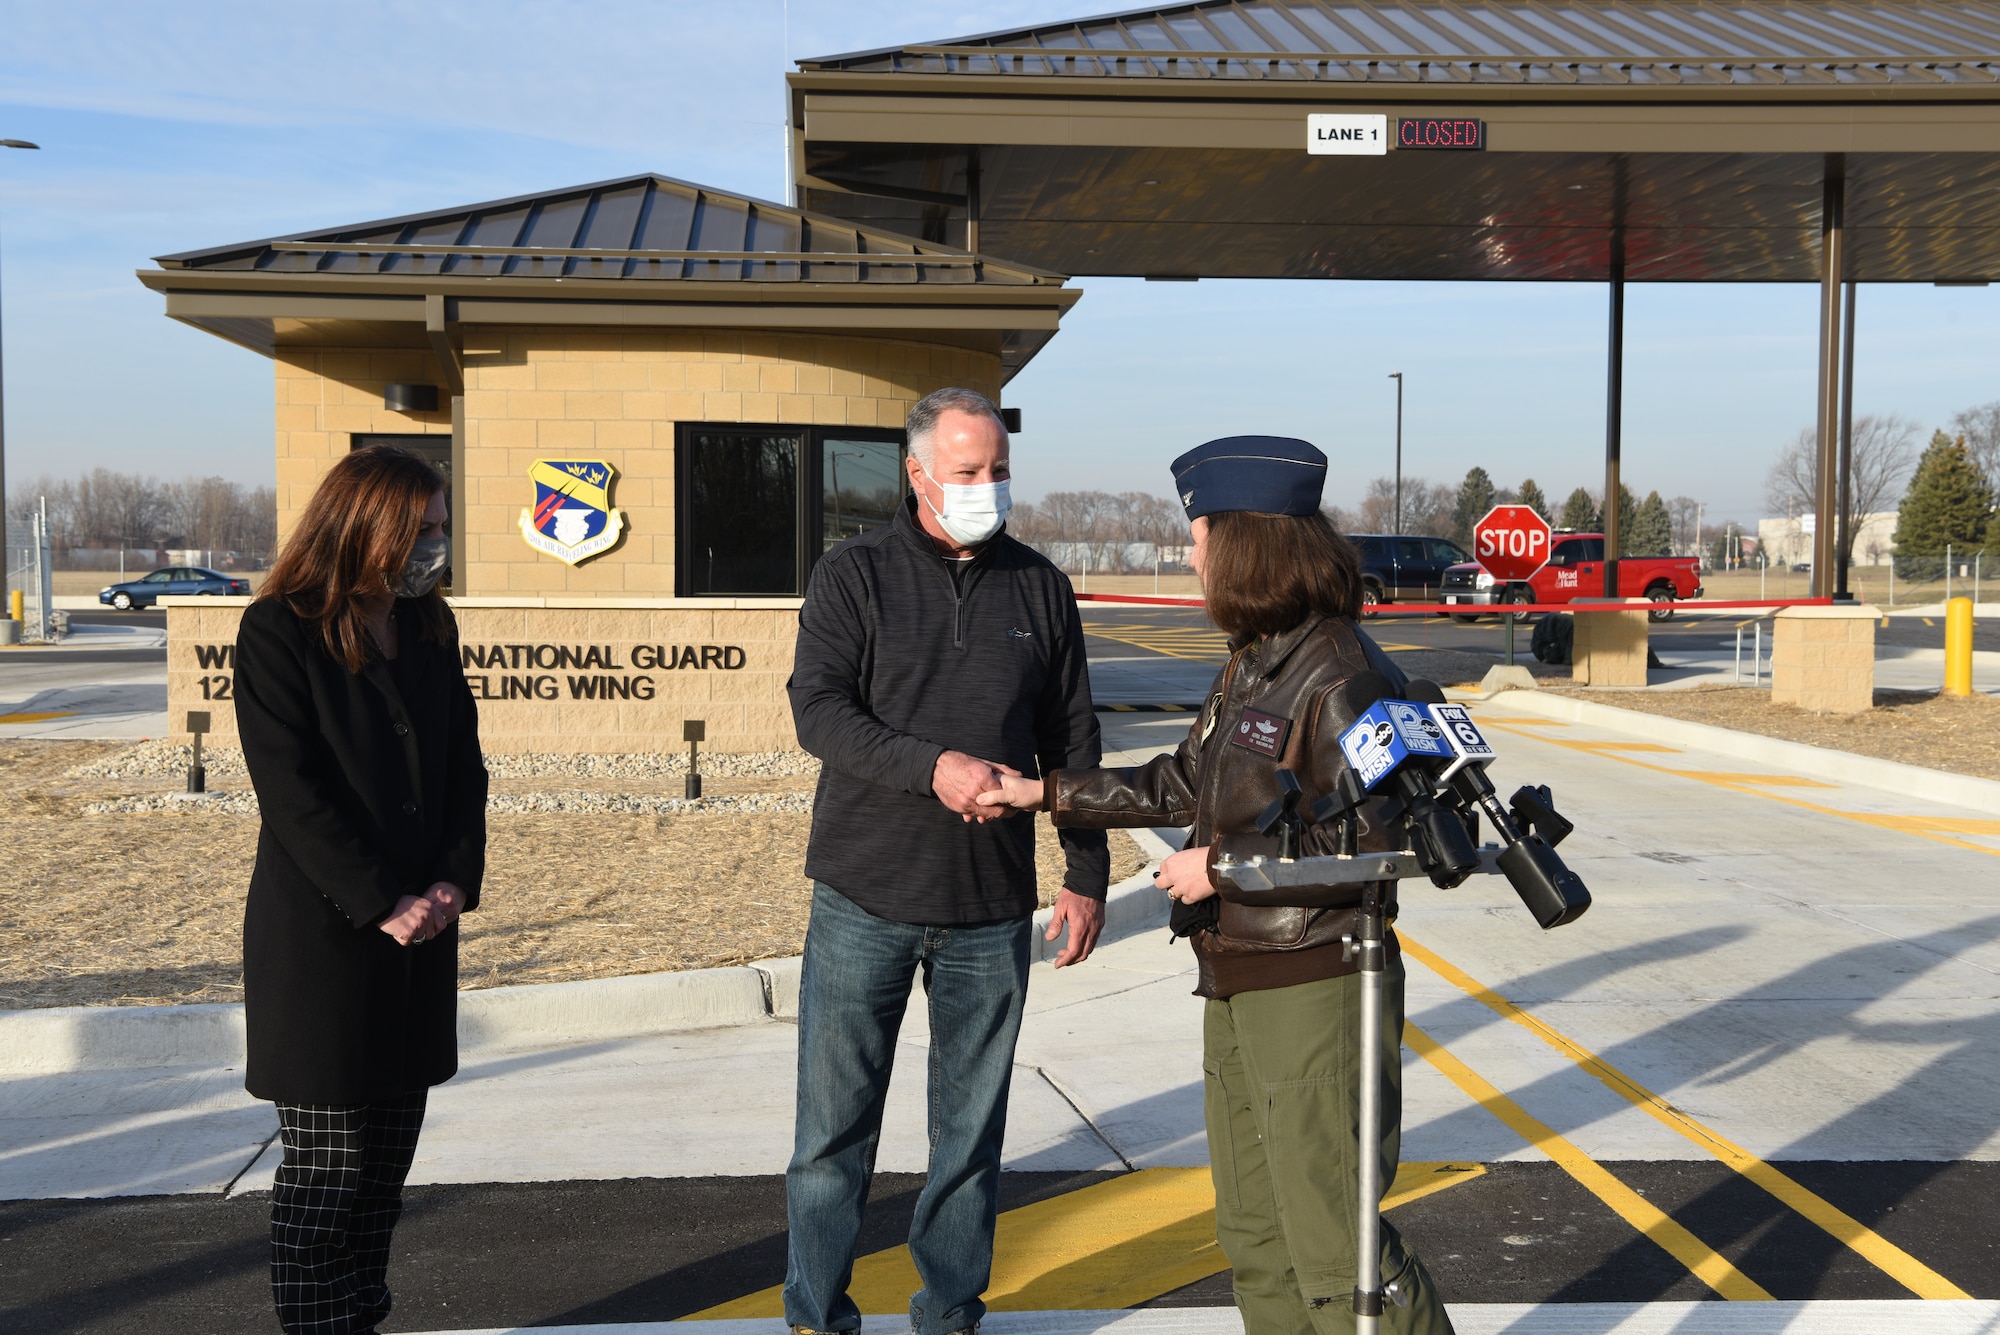 The new main gate significantly improves base defense and traffic flow. Construction of the project began in August 2019 and cost approximately $4.4 million to complete. National Guard Bureau funded the entirety of the project.